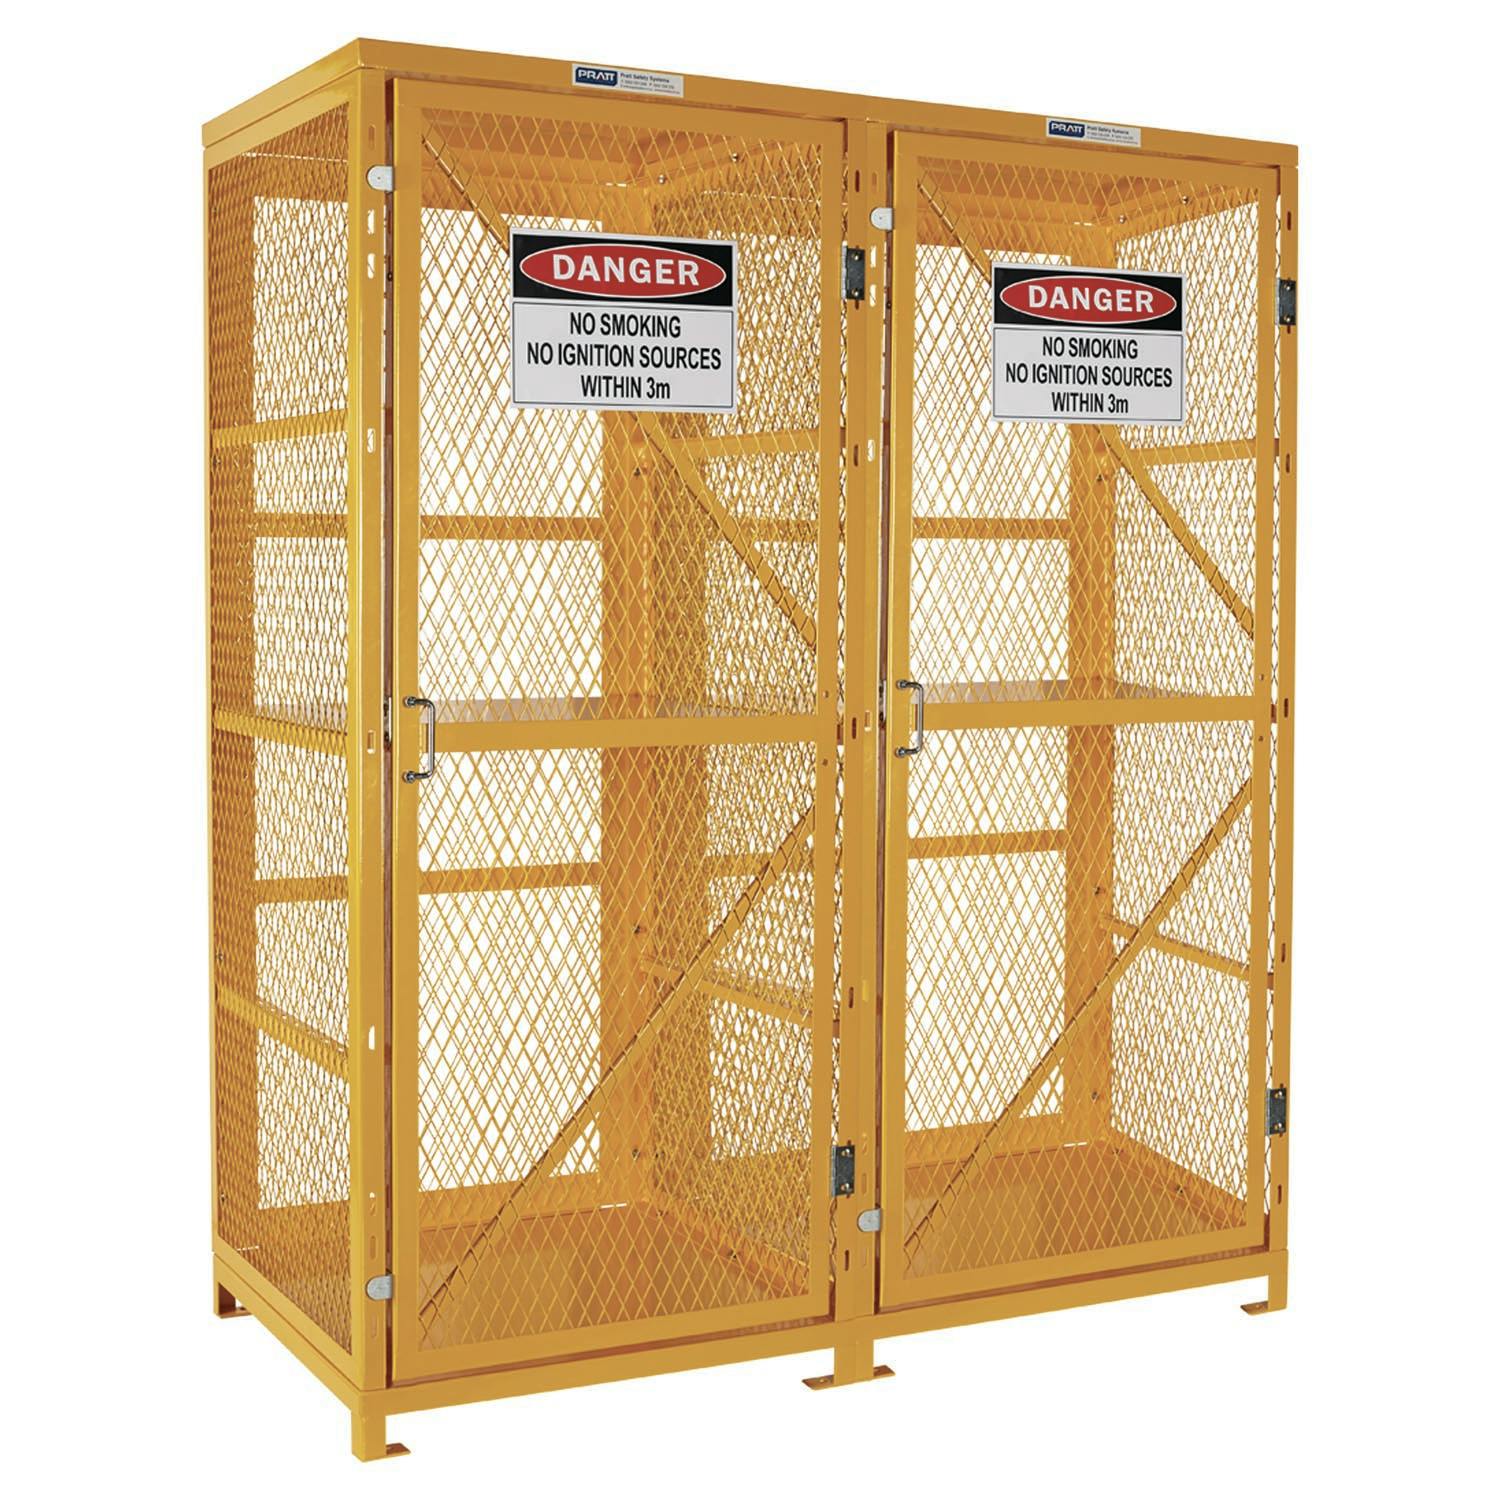 Pratt Forklift Storage Cage. 2 Storage Levels Up To 16 Forklift Cylinders. (Comes Flat Packed - Assembly Required)